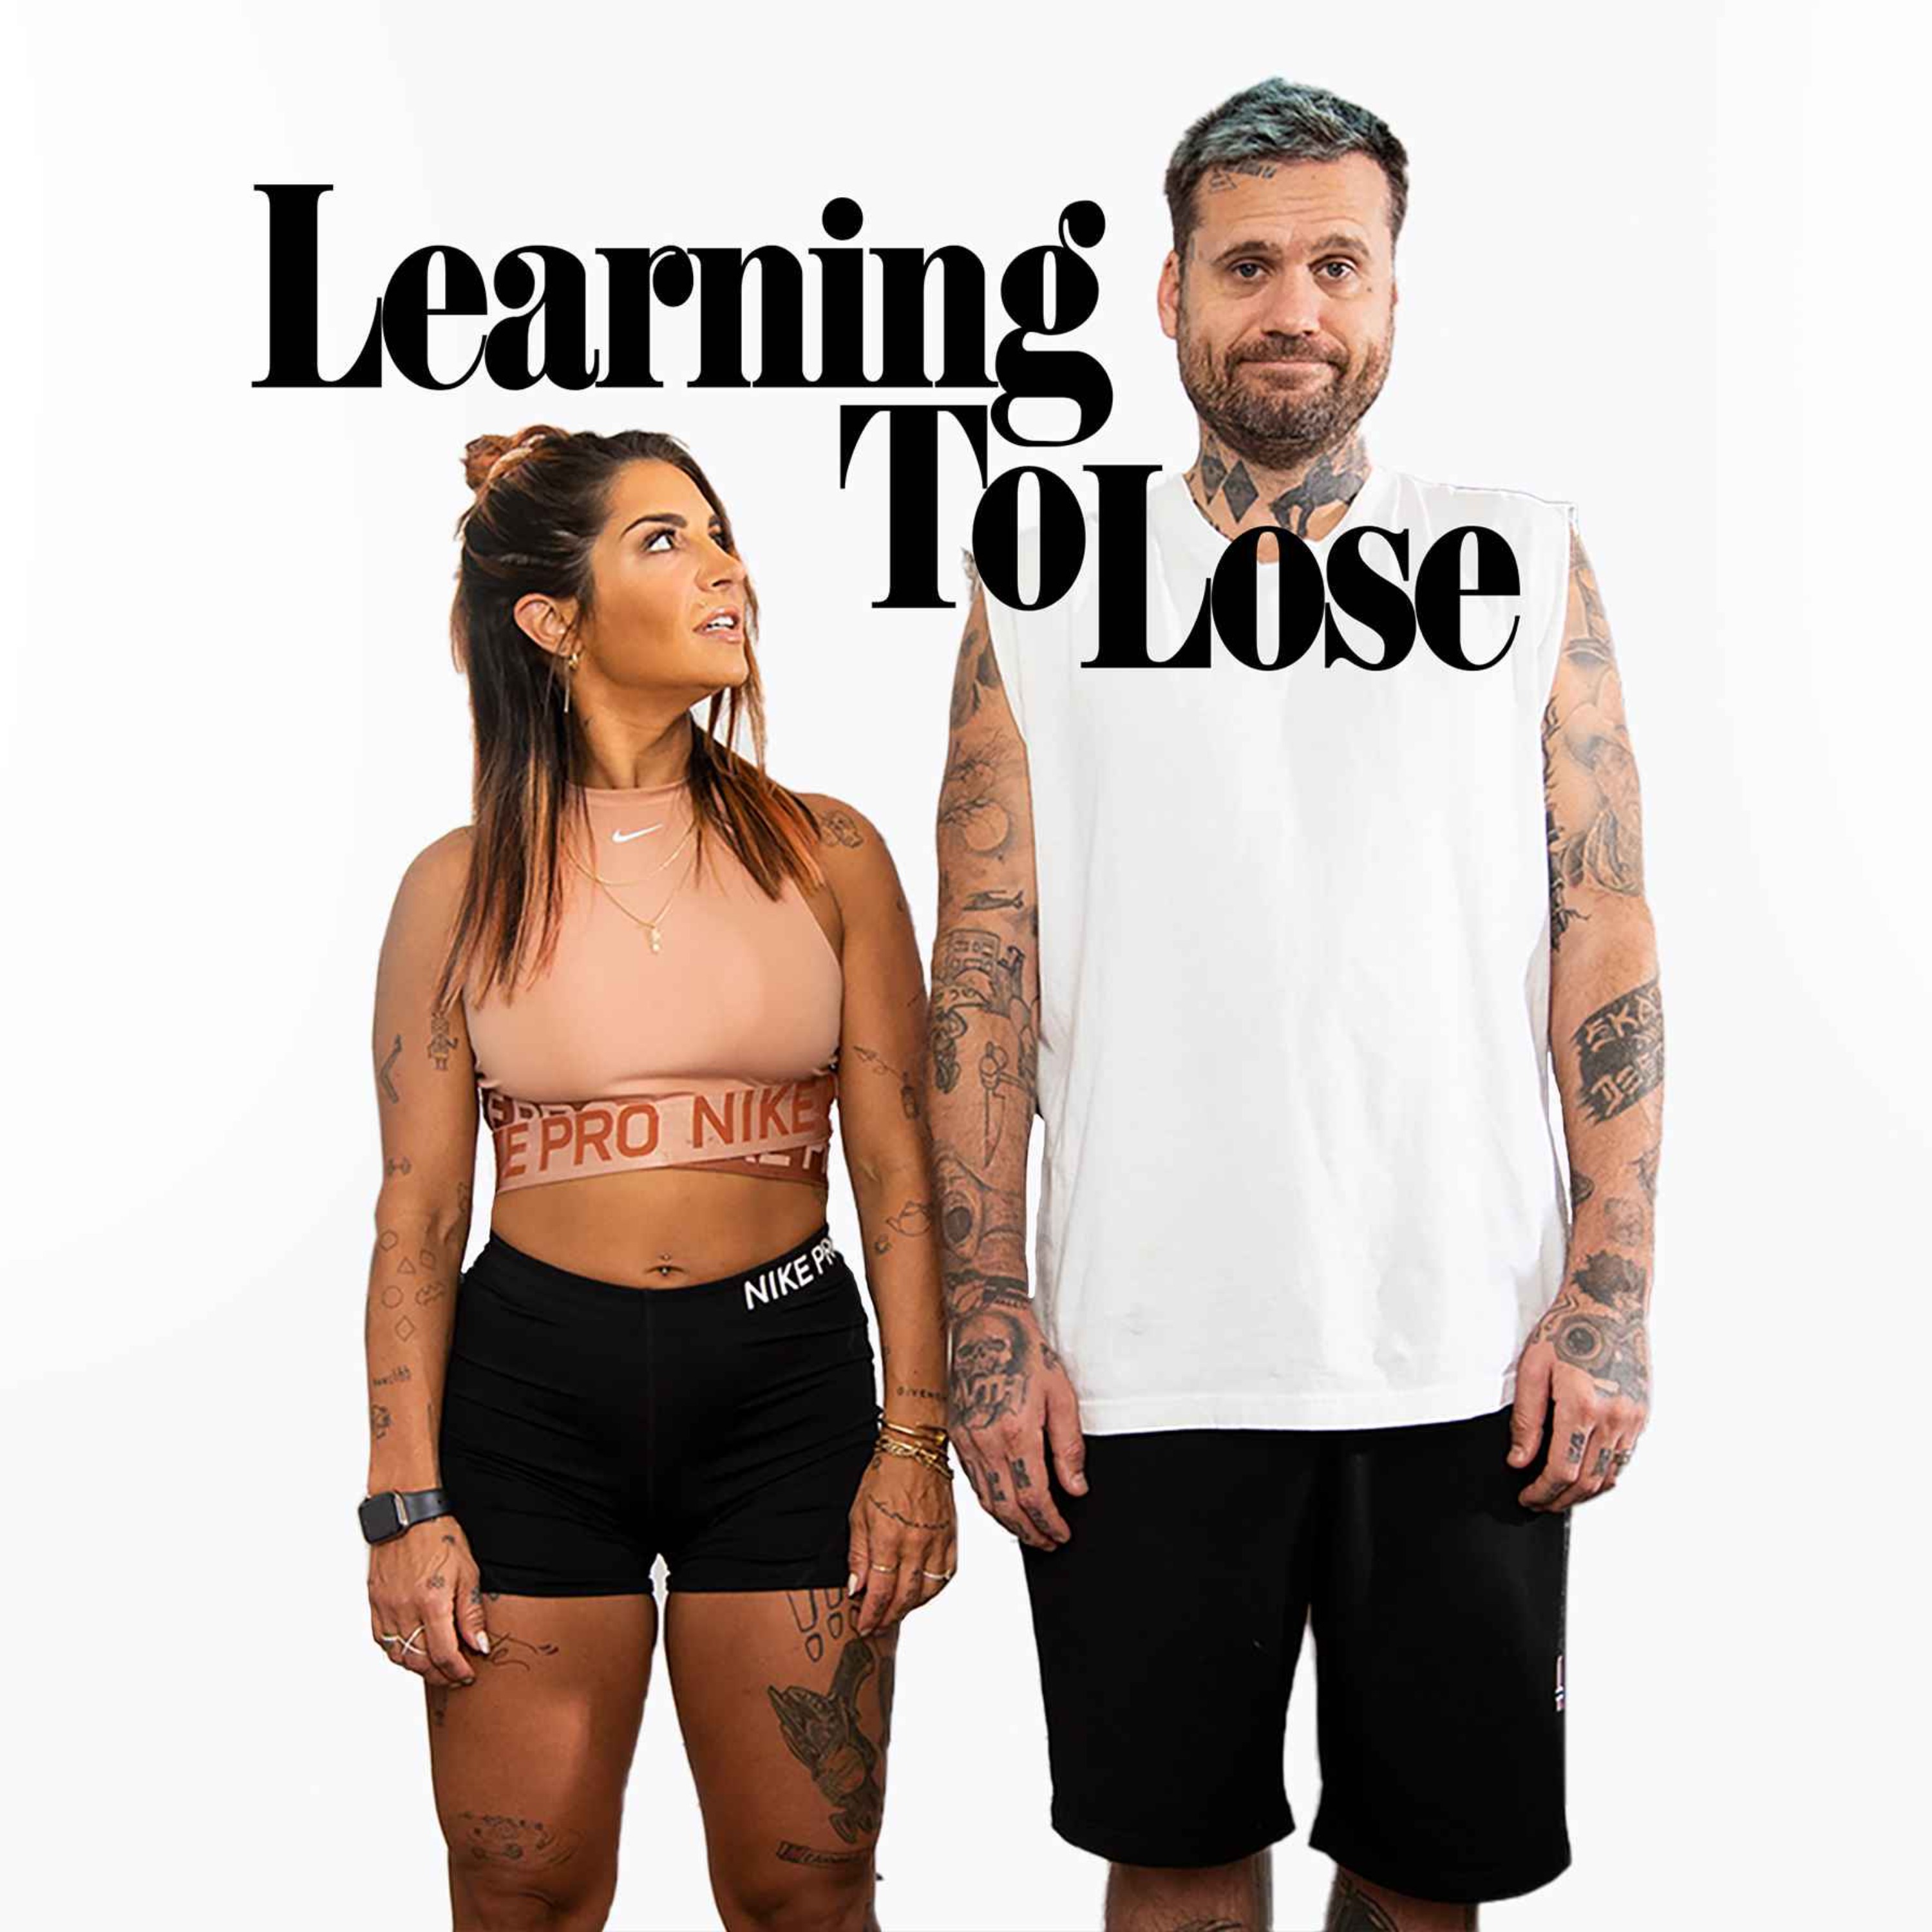 Learning to Lose